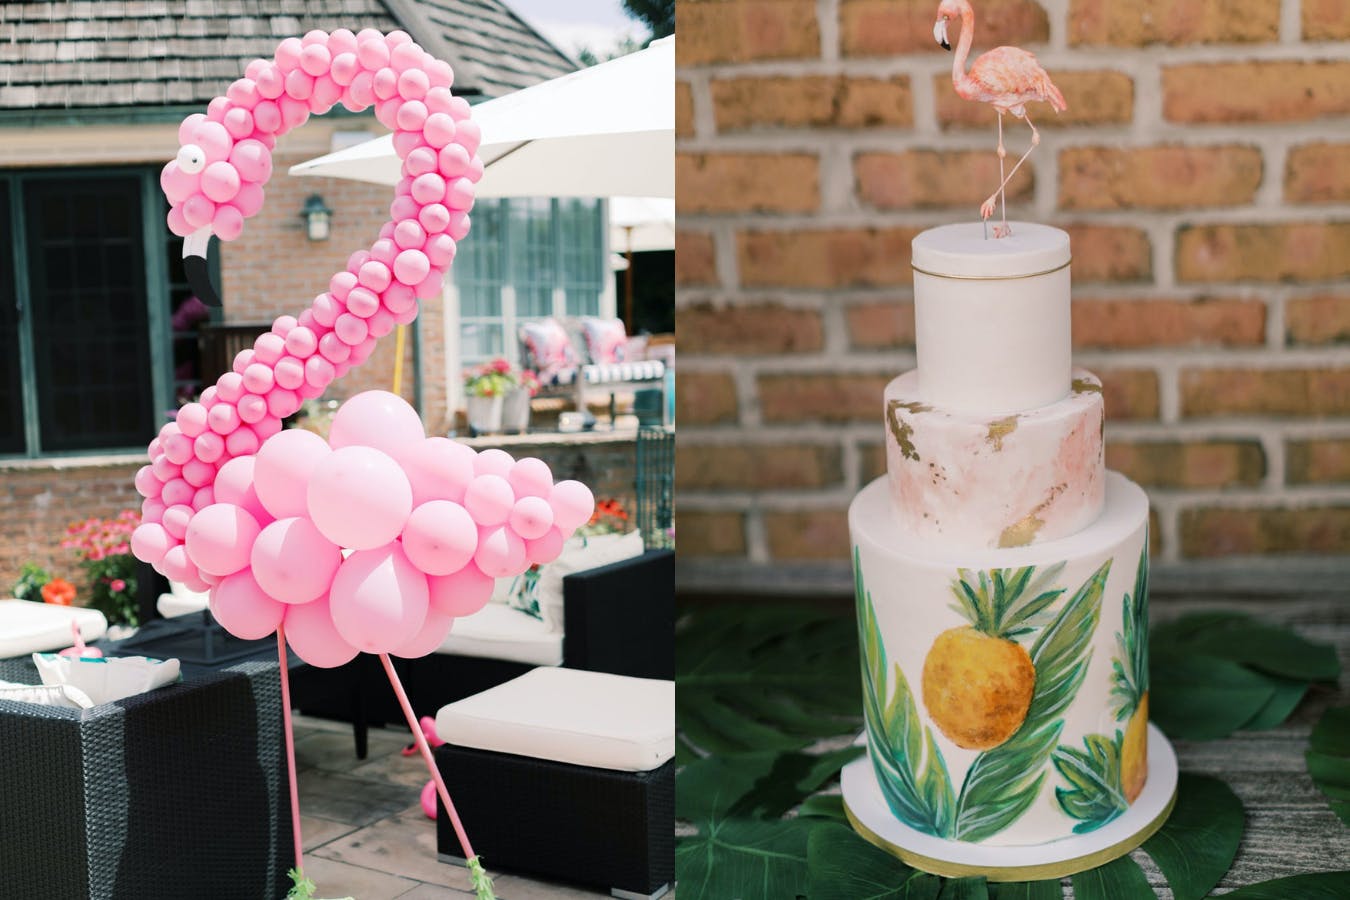 Flamingo-Themed Baby Shower With Pink Flamingo Balloon Structure and Flamingo-Topped Cake | PartySlate